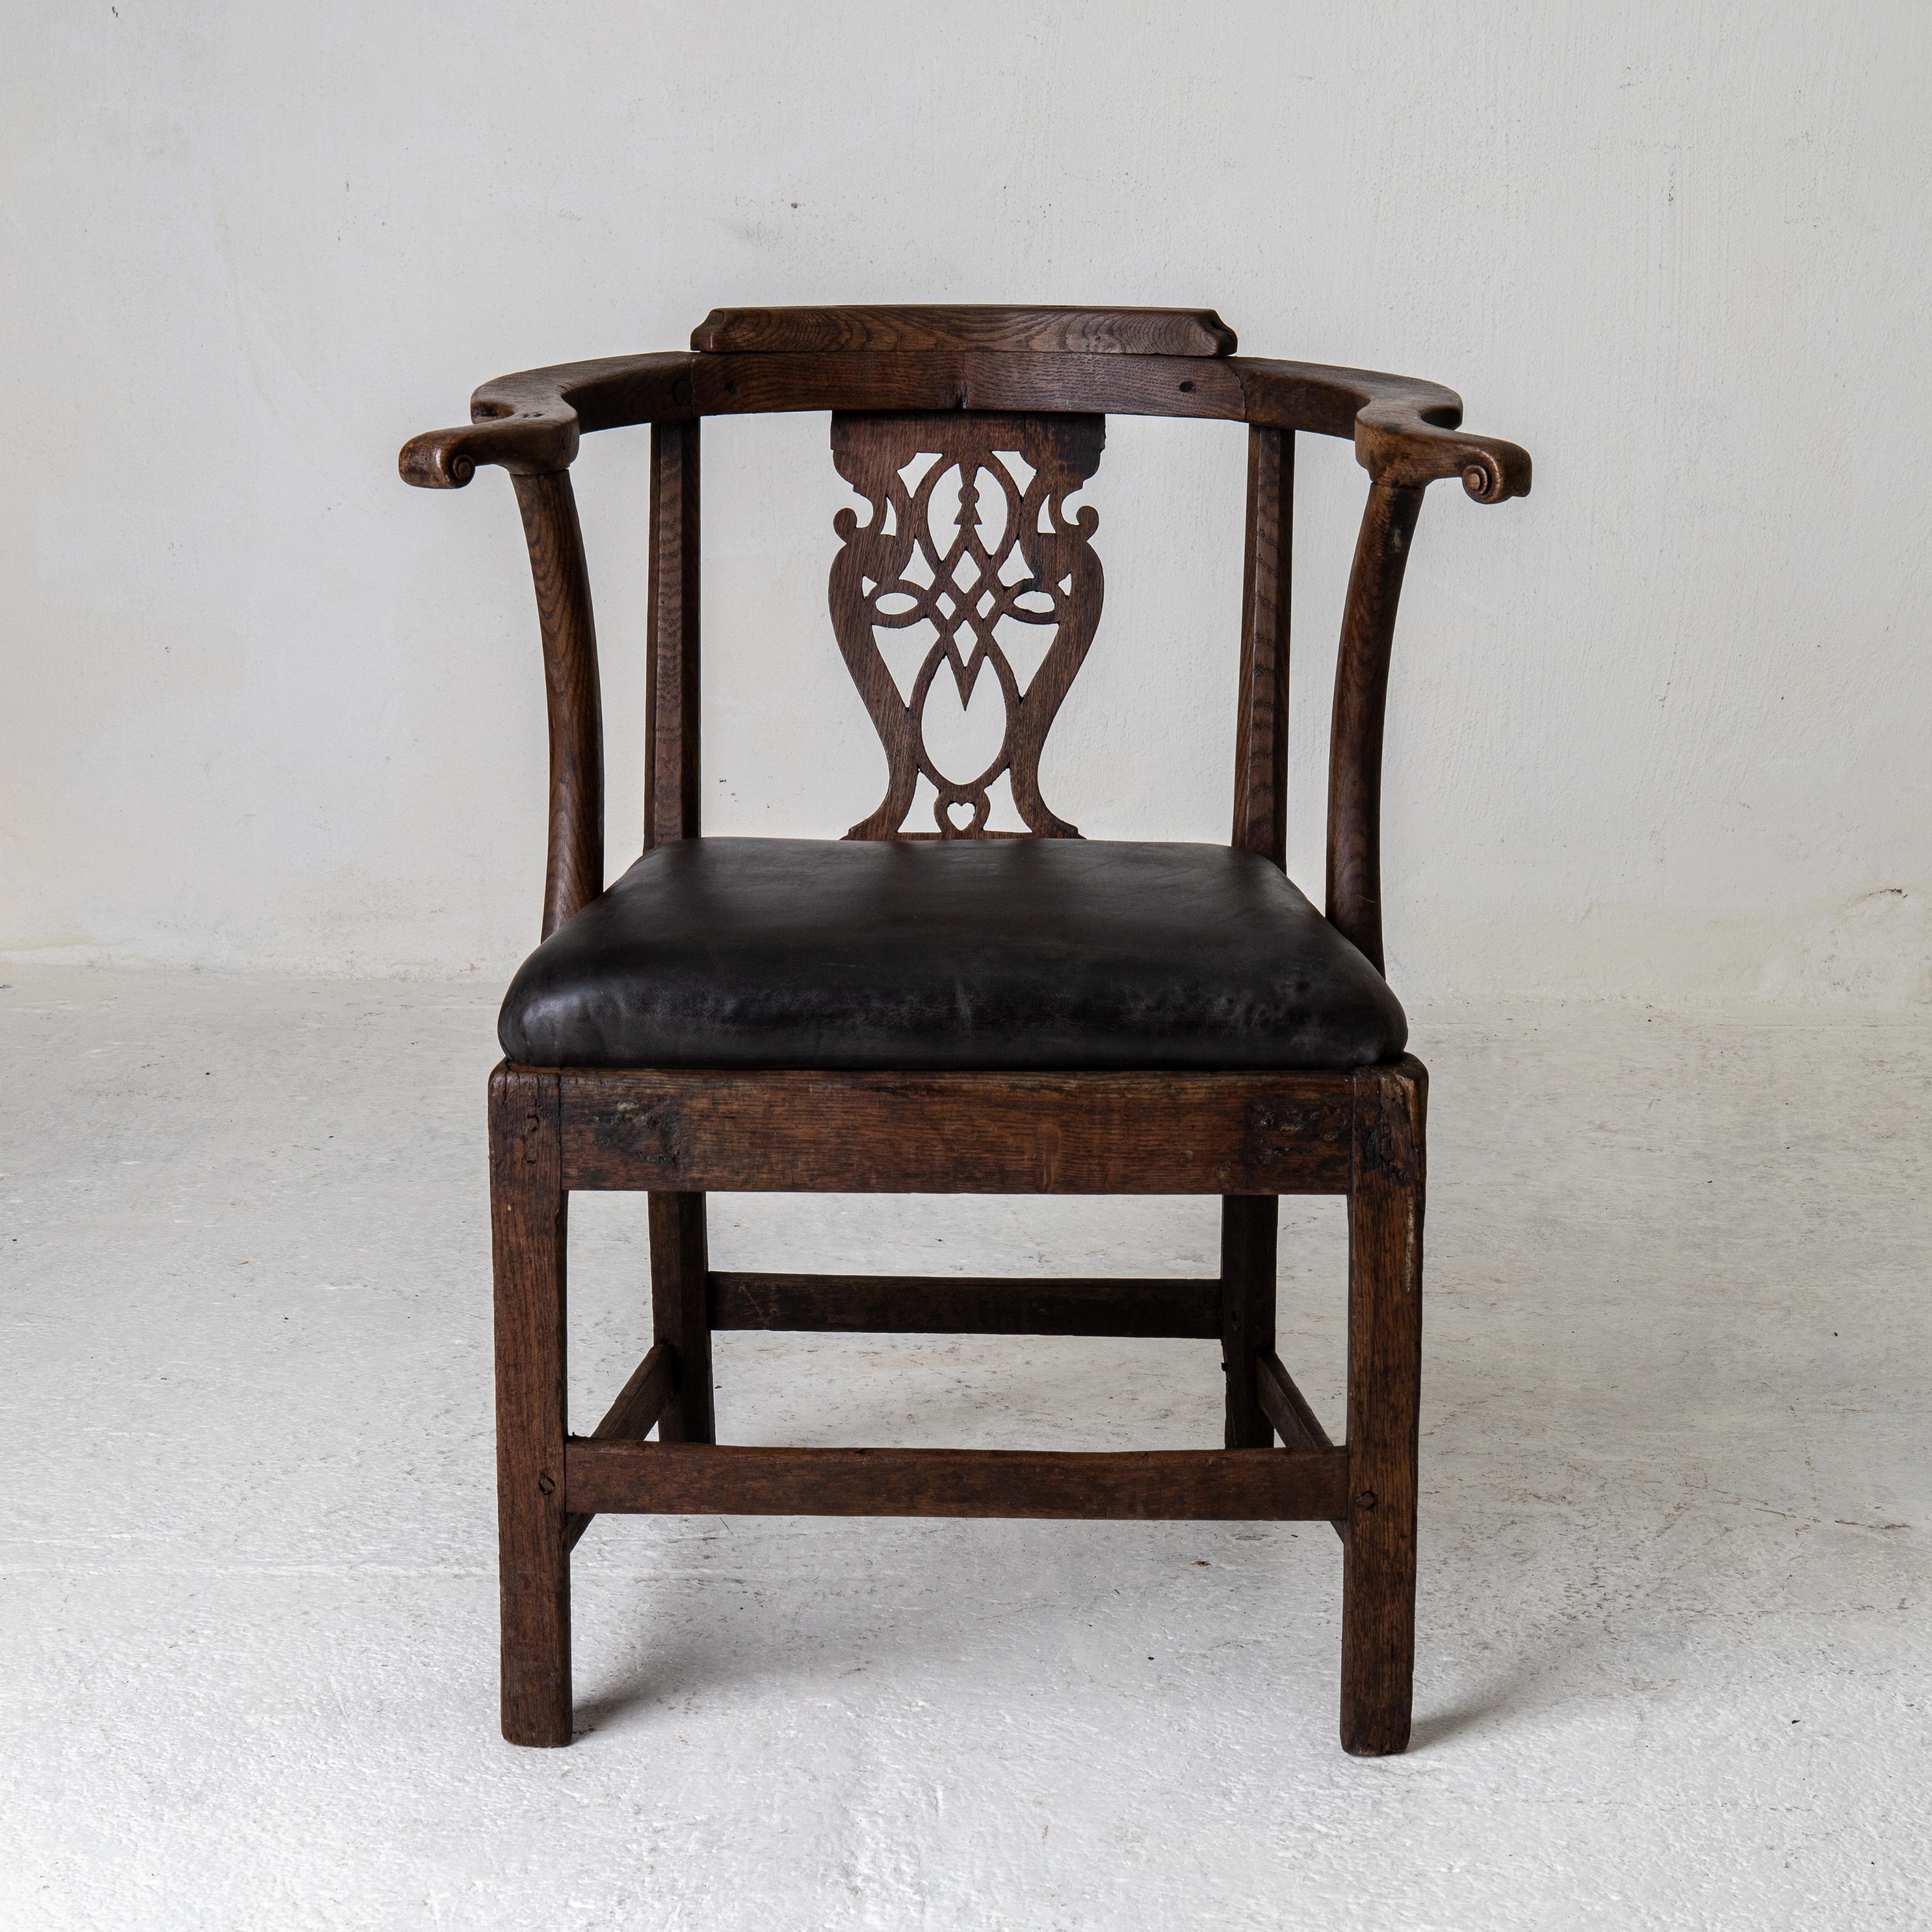 Armchair Early 19th Century England. An armchair made during the early part of the 19th century in Enland. Frame made from walnut. Seat upholstered in a black leather.